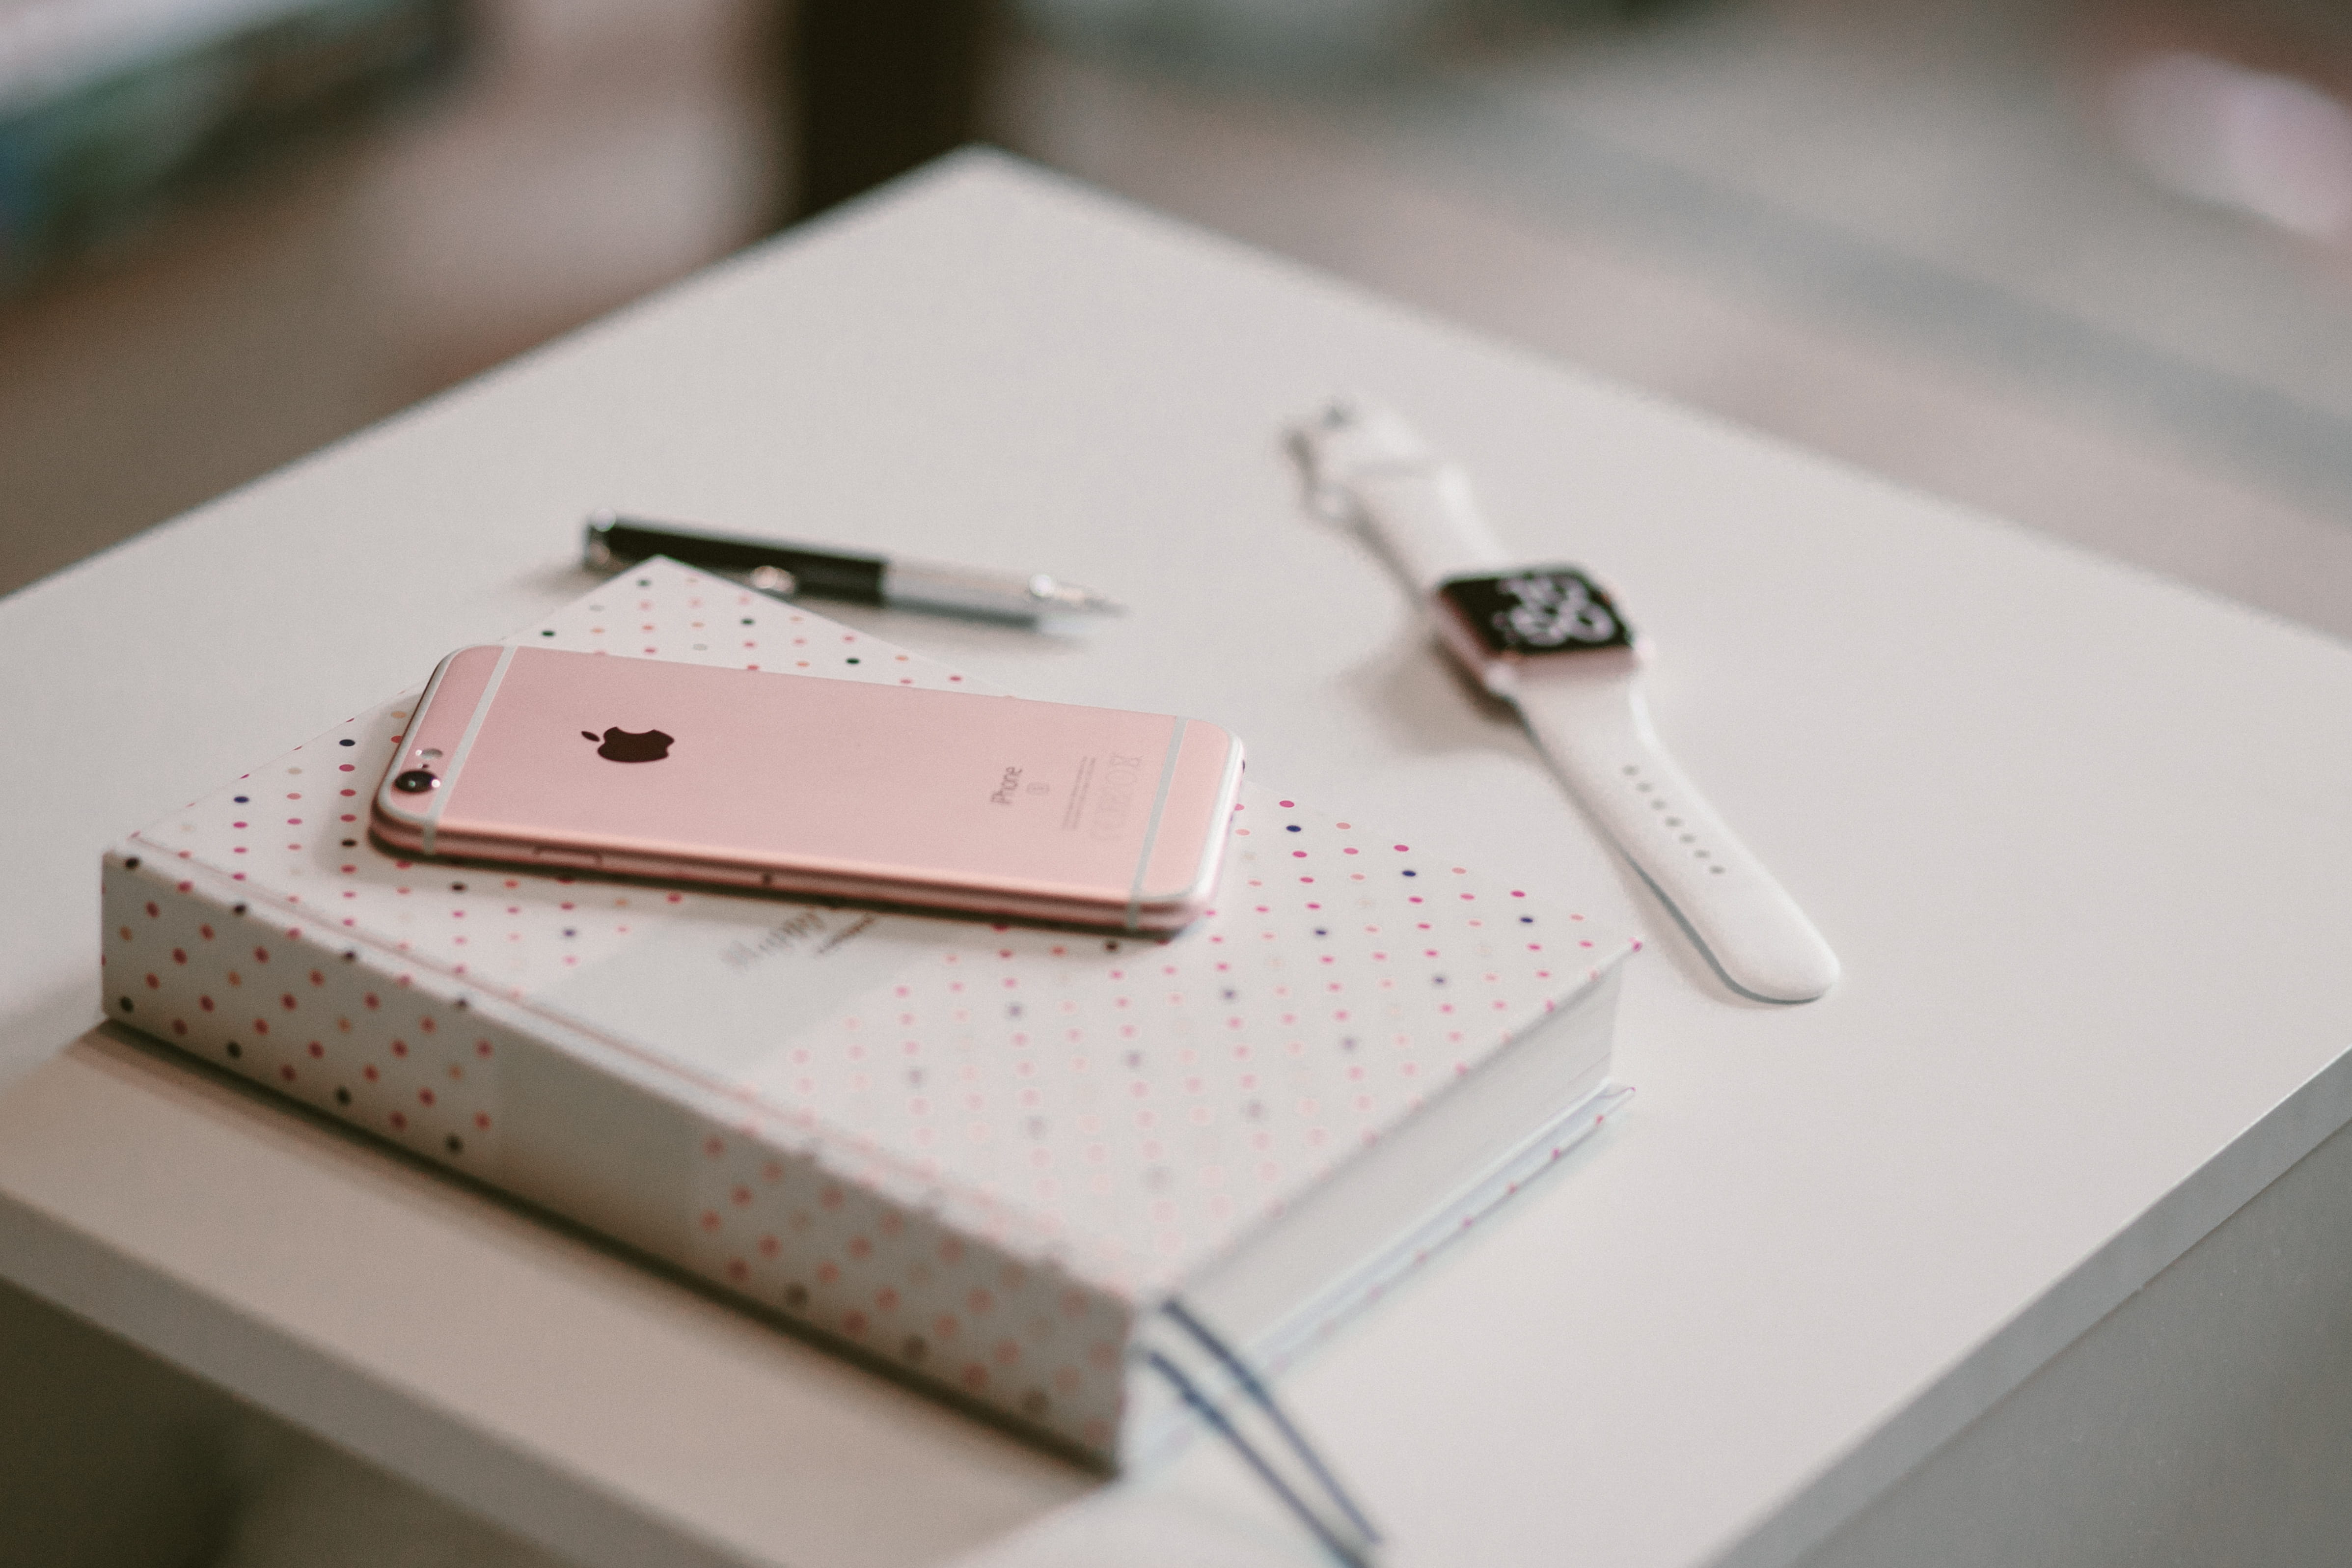 rose gold iPhone 6s on book near Apple watch, rose gold iPhone 6s on white notebook near gold Apple Watch